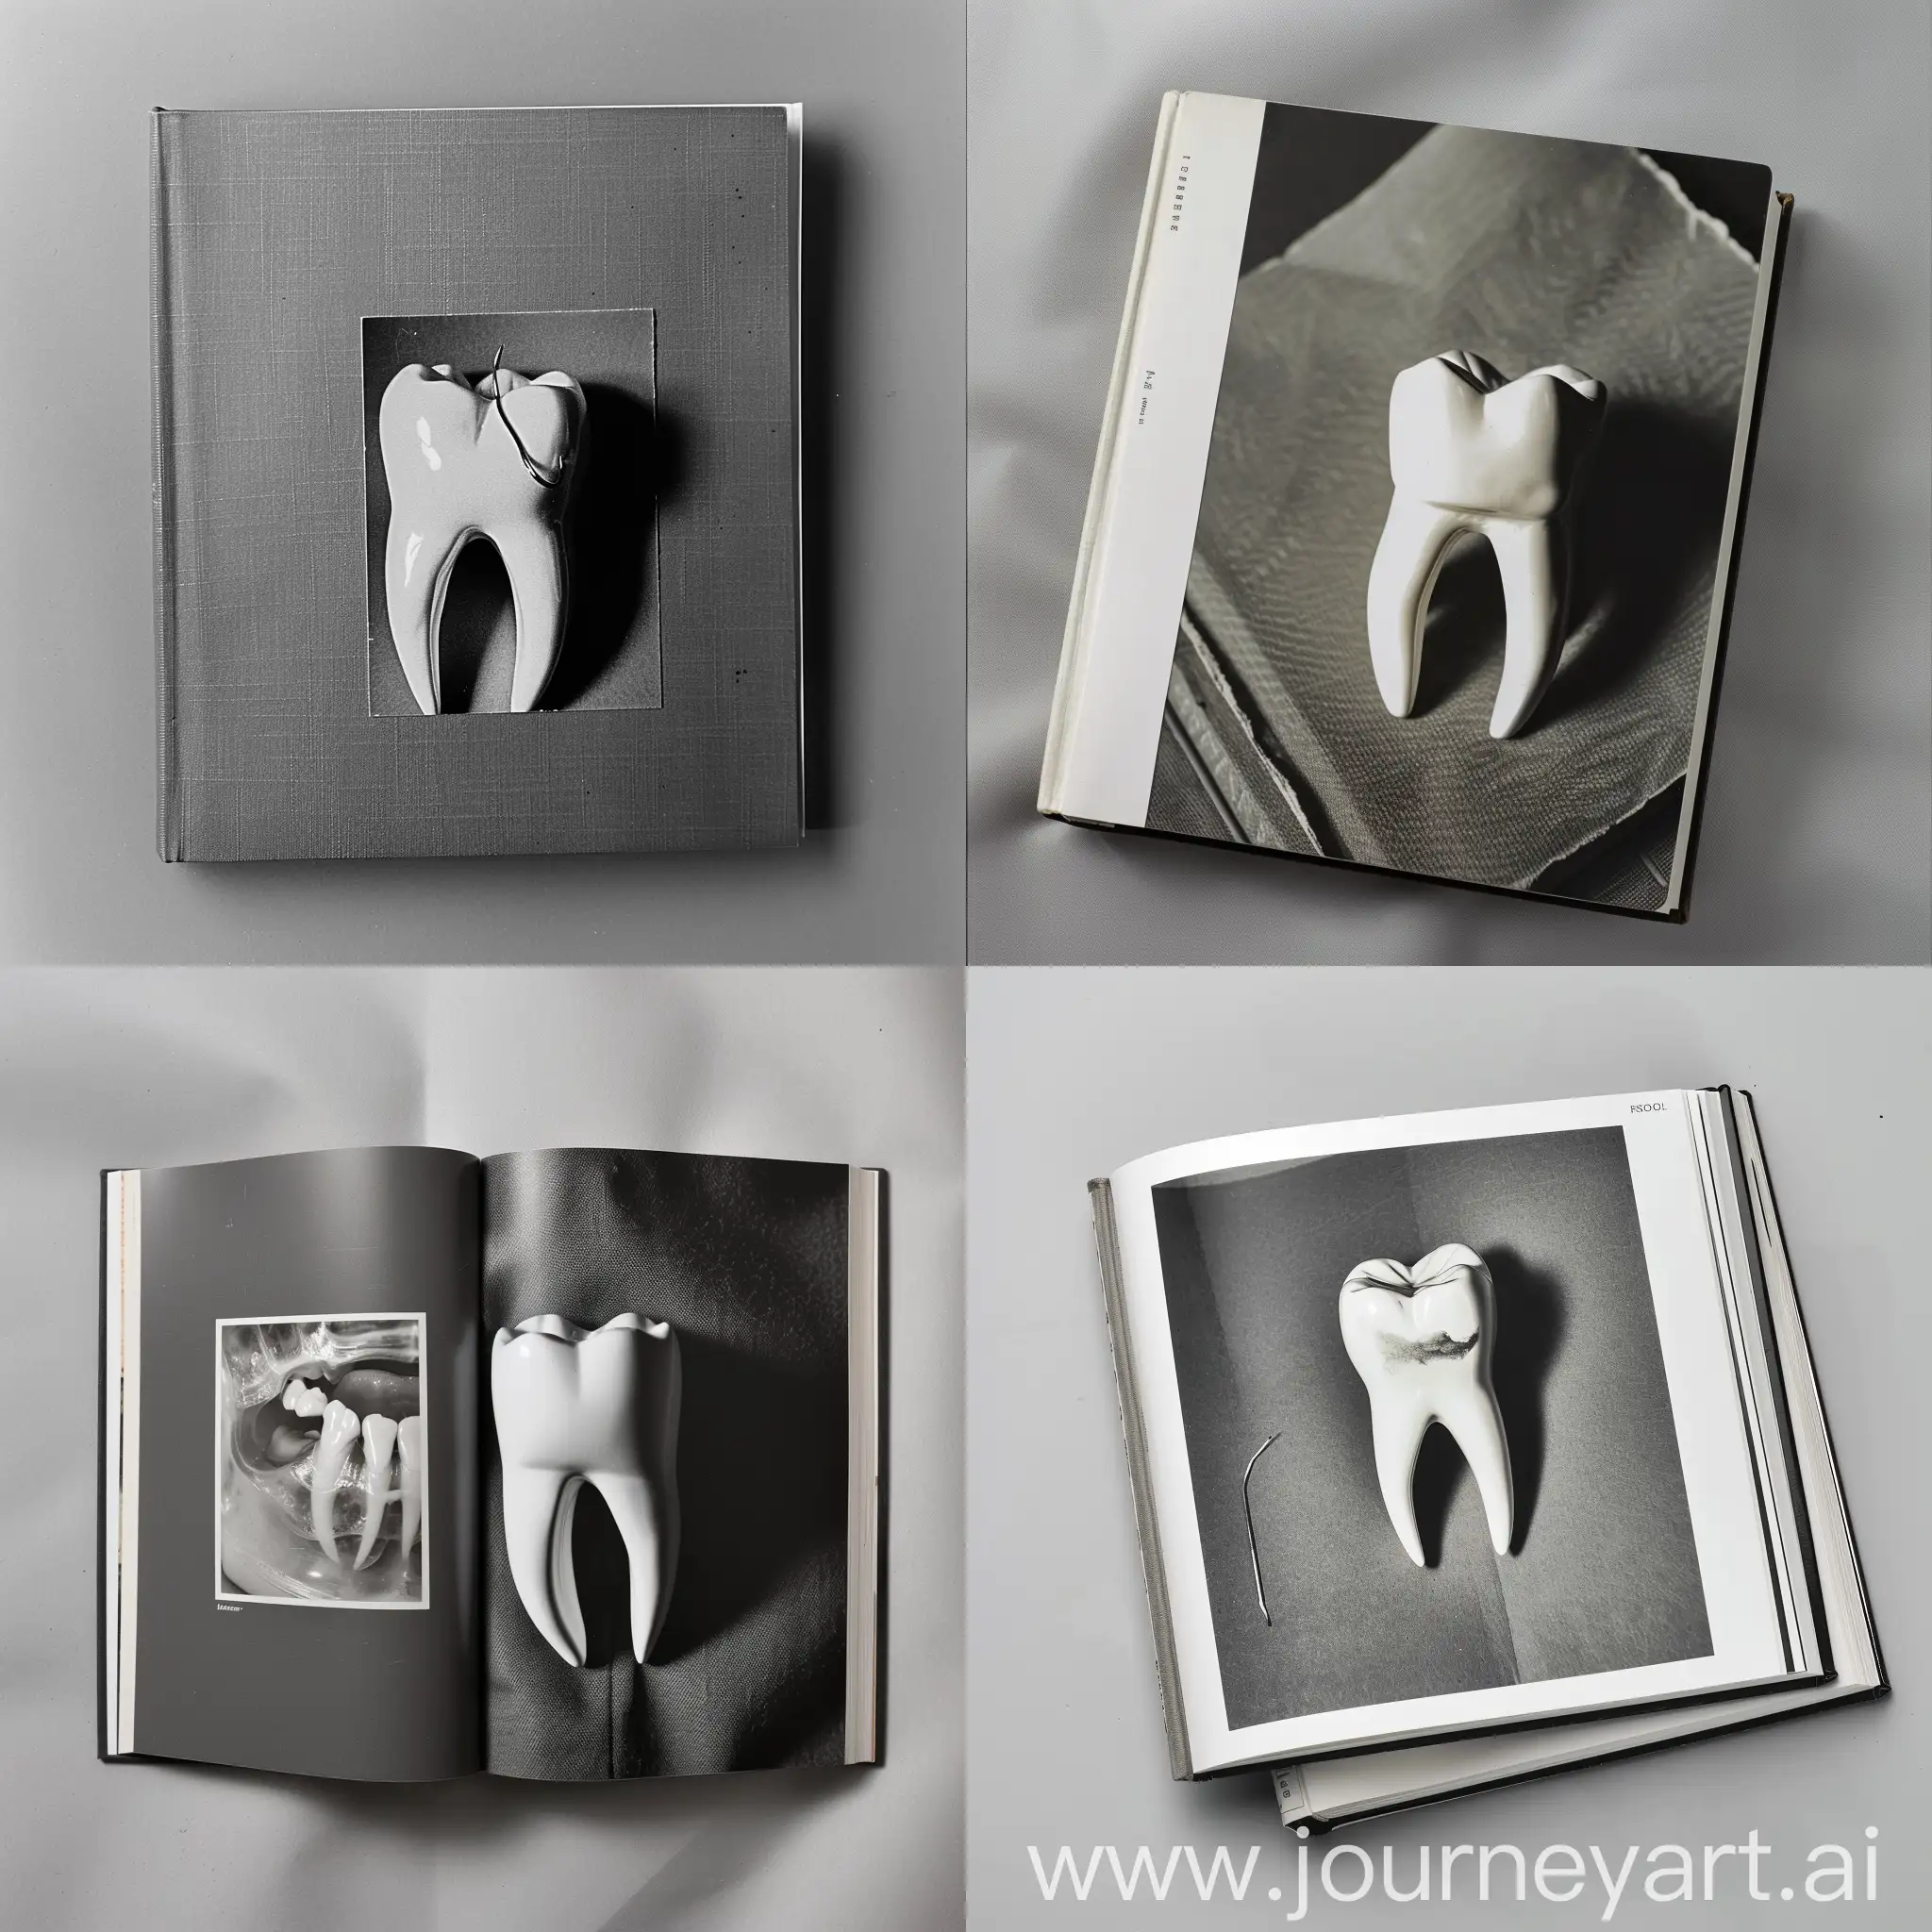 book with a picture of a tooth on the cover, black and white photo, gray uniform background